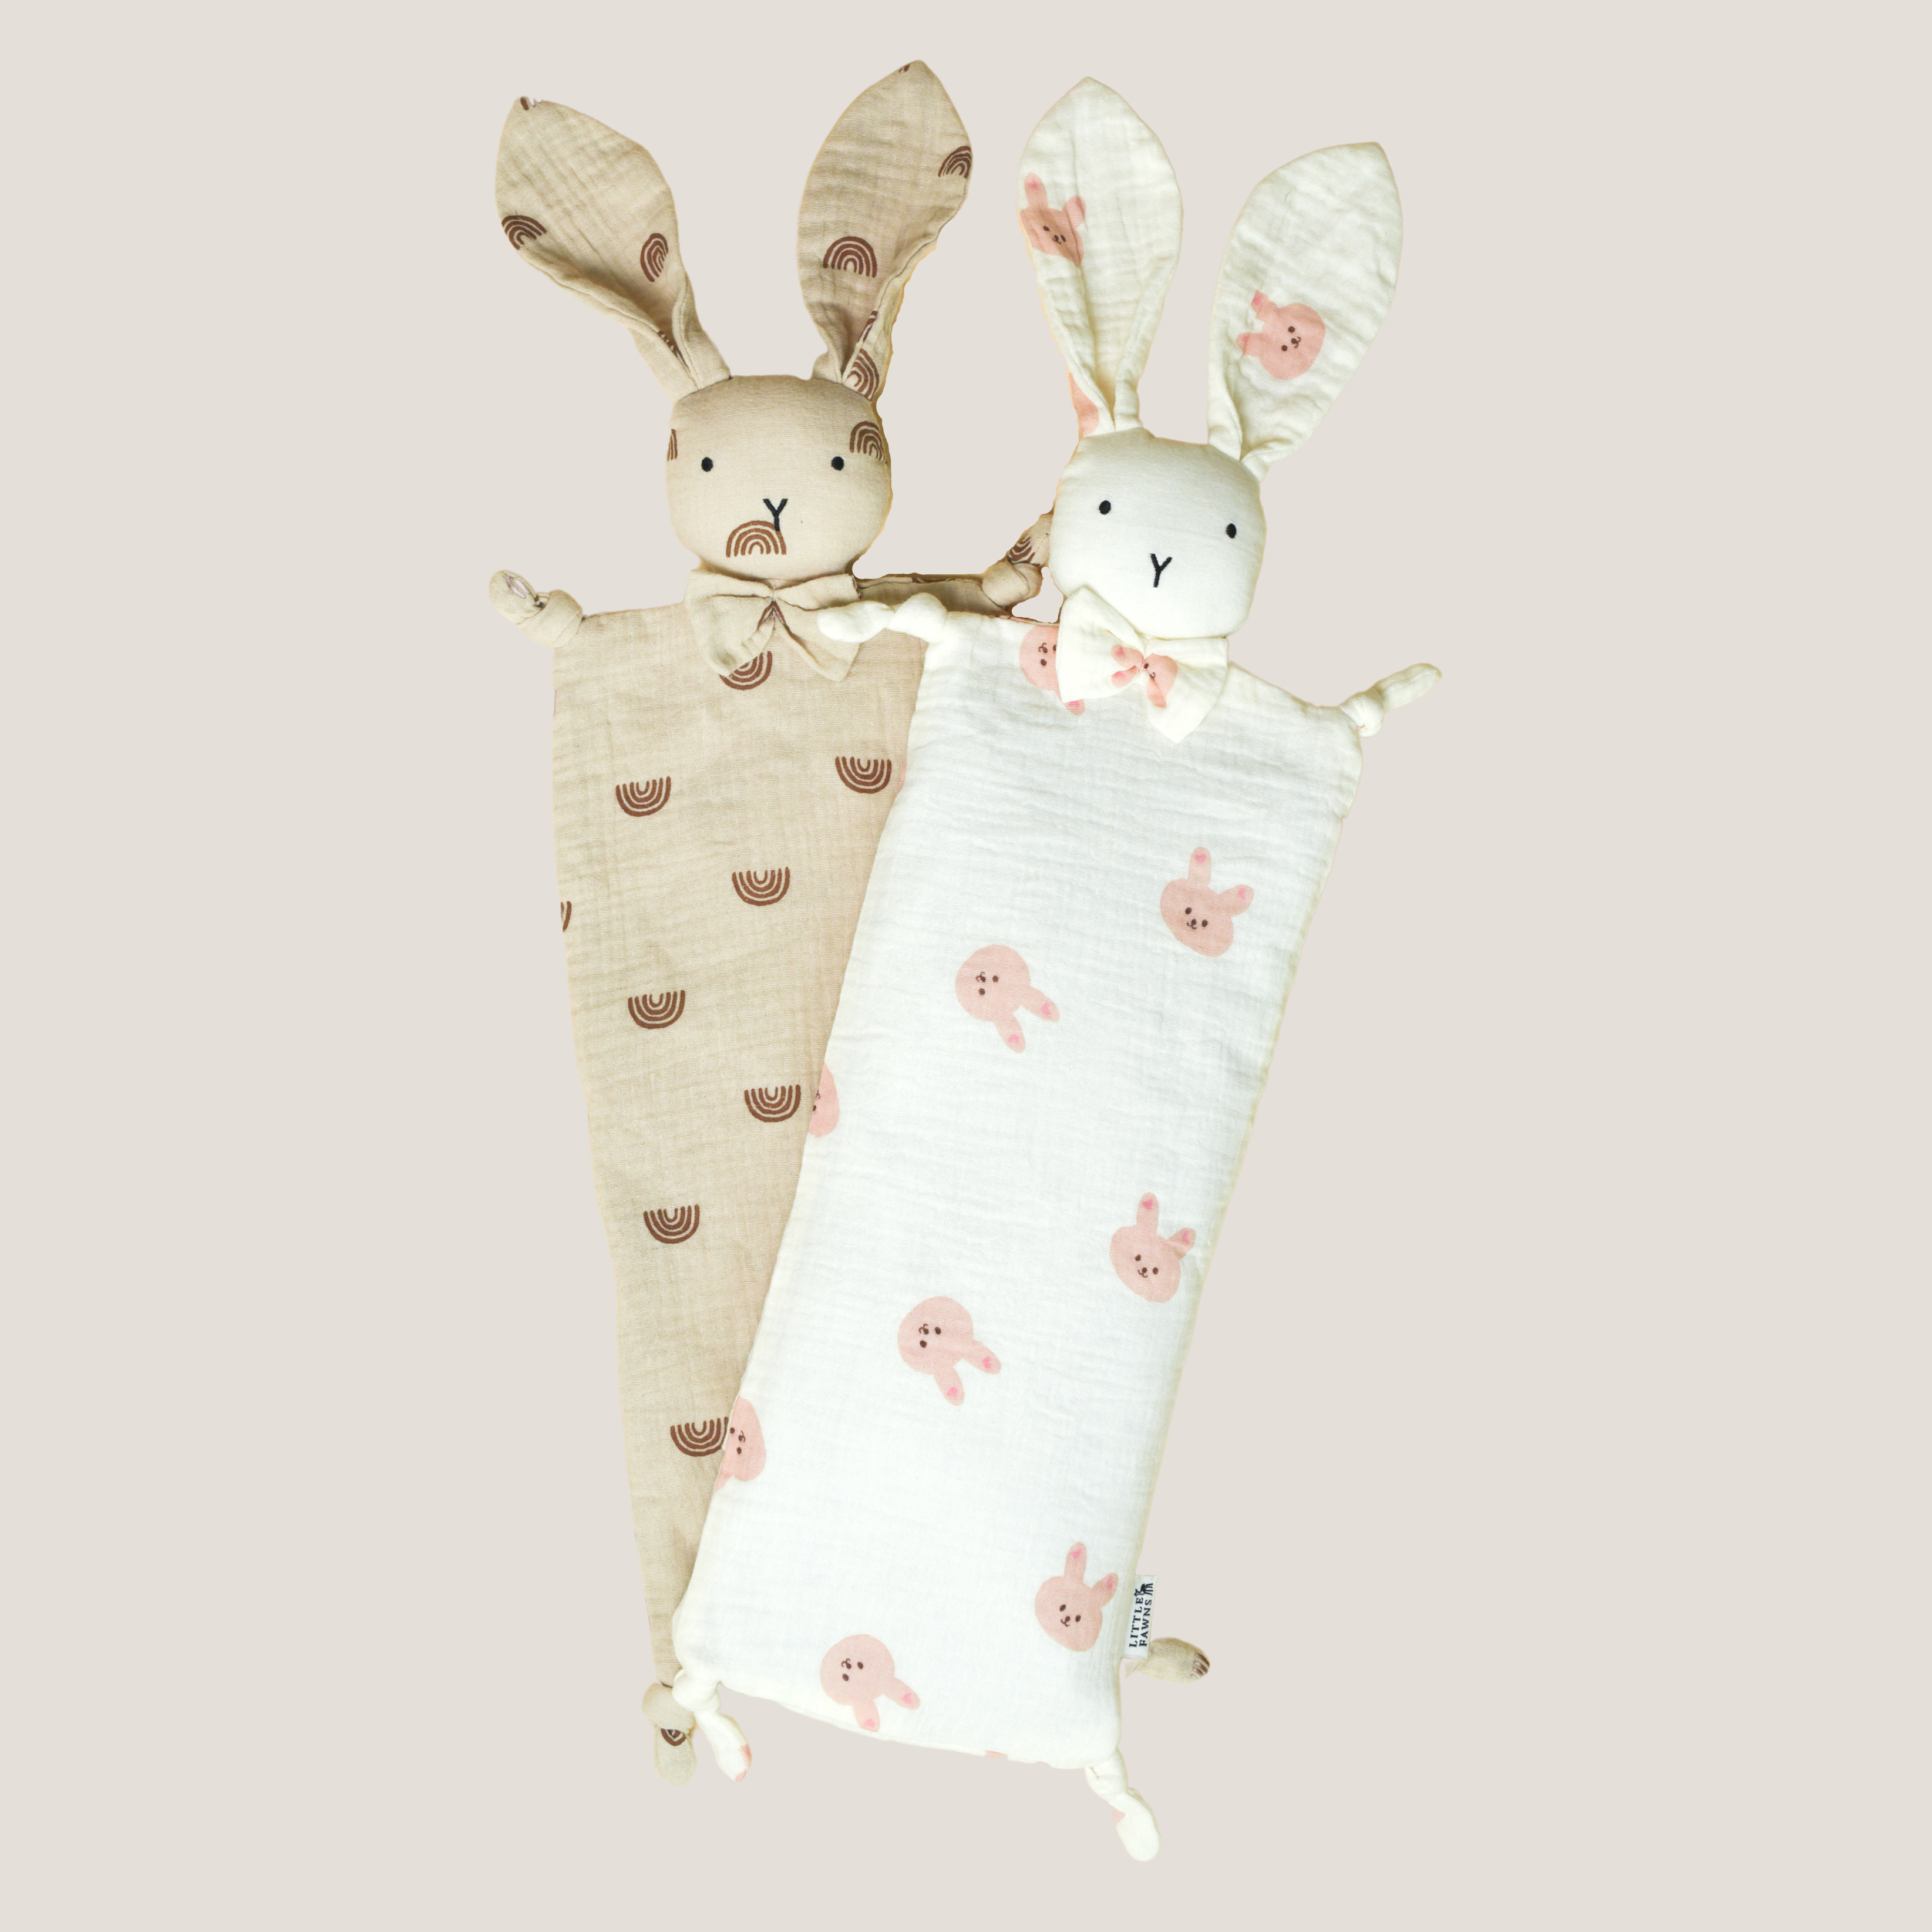 Snuggly Bunny Beansprout Husk Pillow + Cover Bundle (Rabbit & Ivory Beige Rainbow)